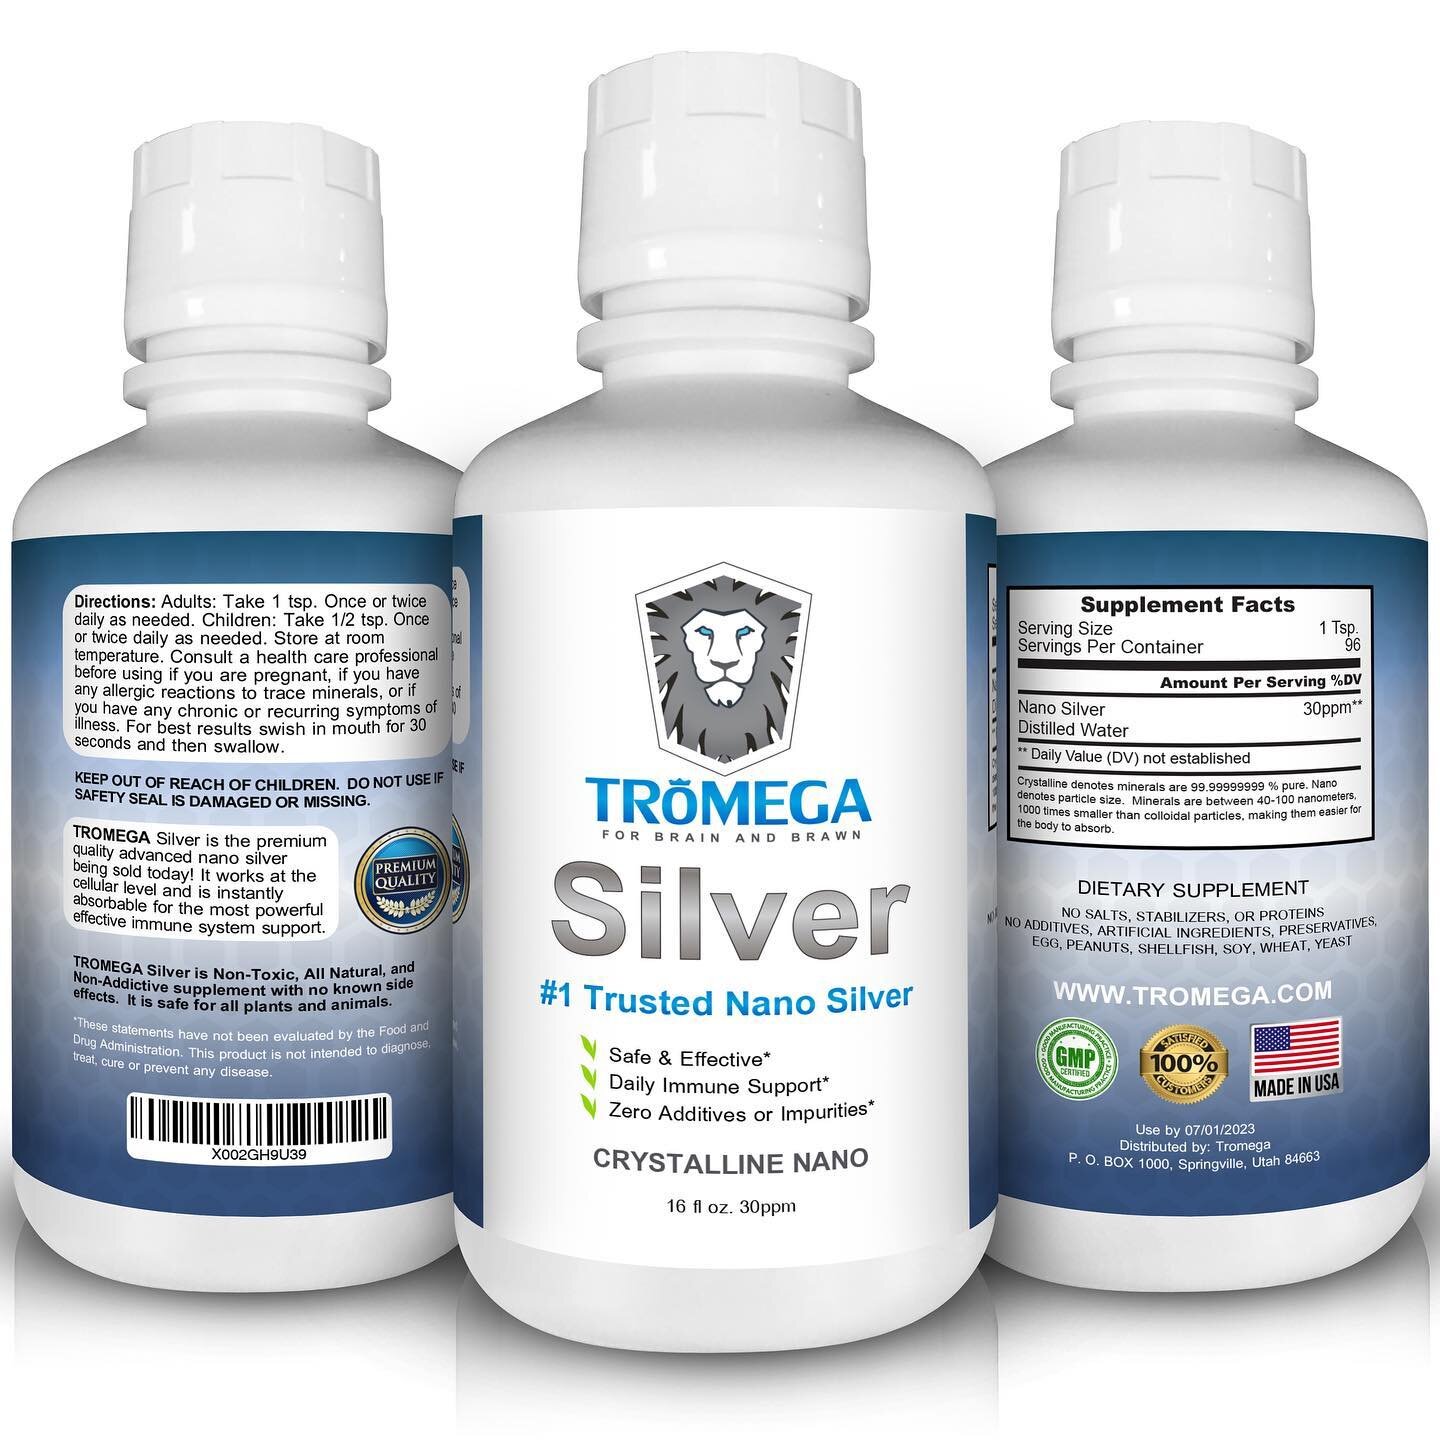 TROMEGA SILVER IS NOW LIVE ON OUR WEBSITE! Click the link in our bio to purchase yours today! 

#tromega #silver #nano #mineral #immune #cellular #strong #immunesupport